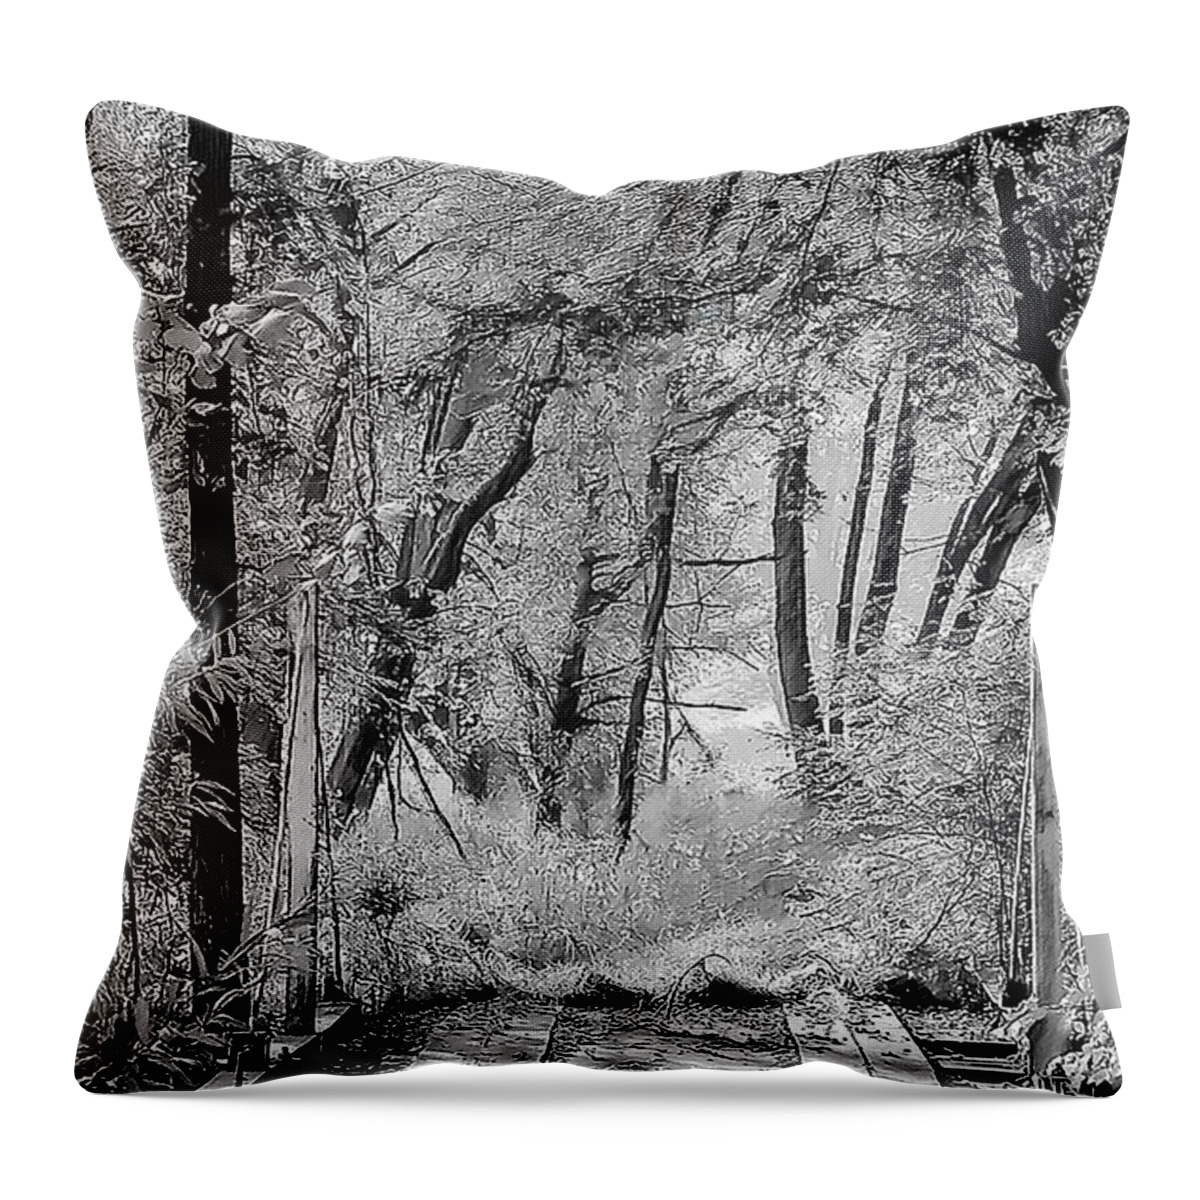 Black And White Throw Pillow featuring the photograph Crossing Over #1 by Wild Thing